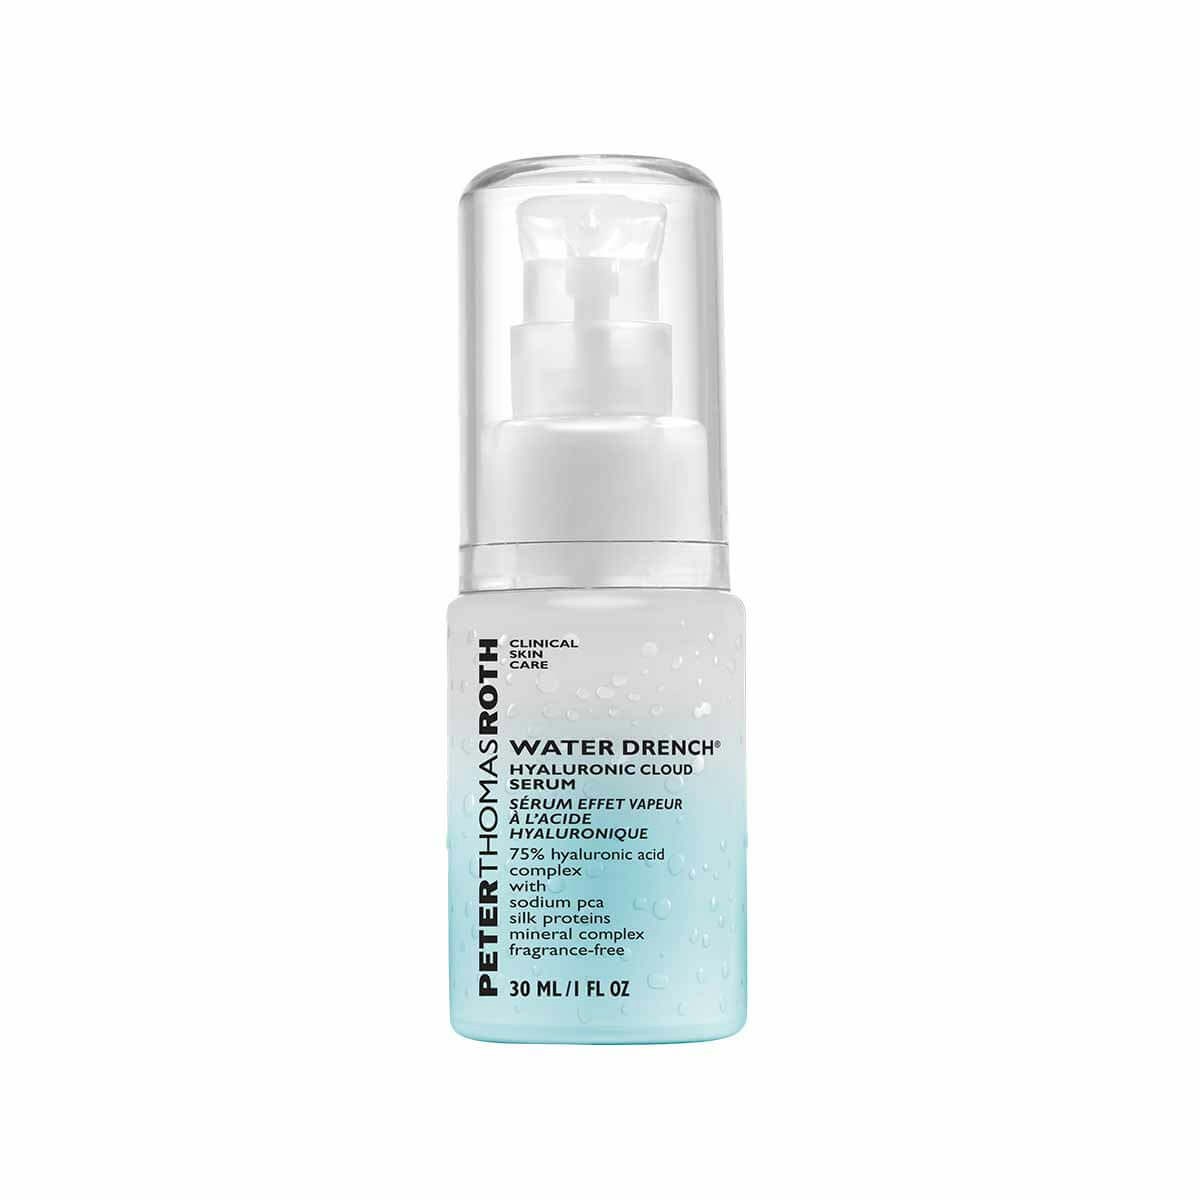 Peter Thomas Roth Peter Thomas Roth Peter Thomas Roth Water Drench Hyaluronic Cloud Serum 30ml